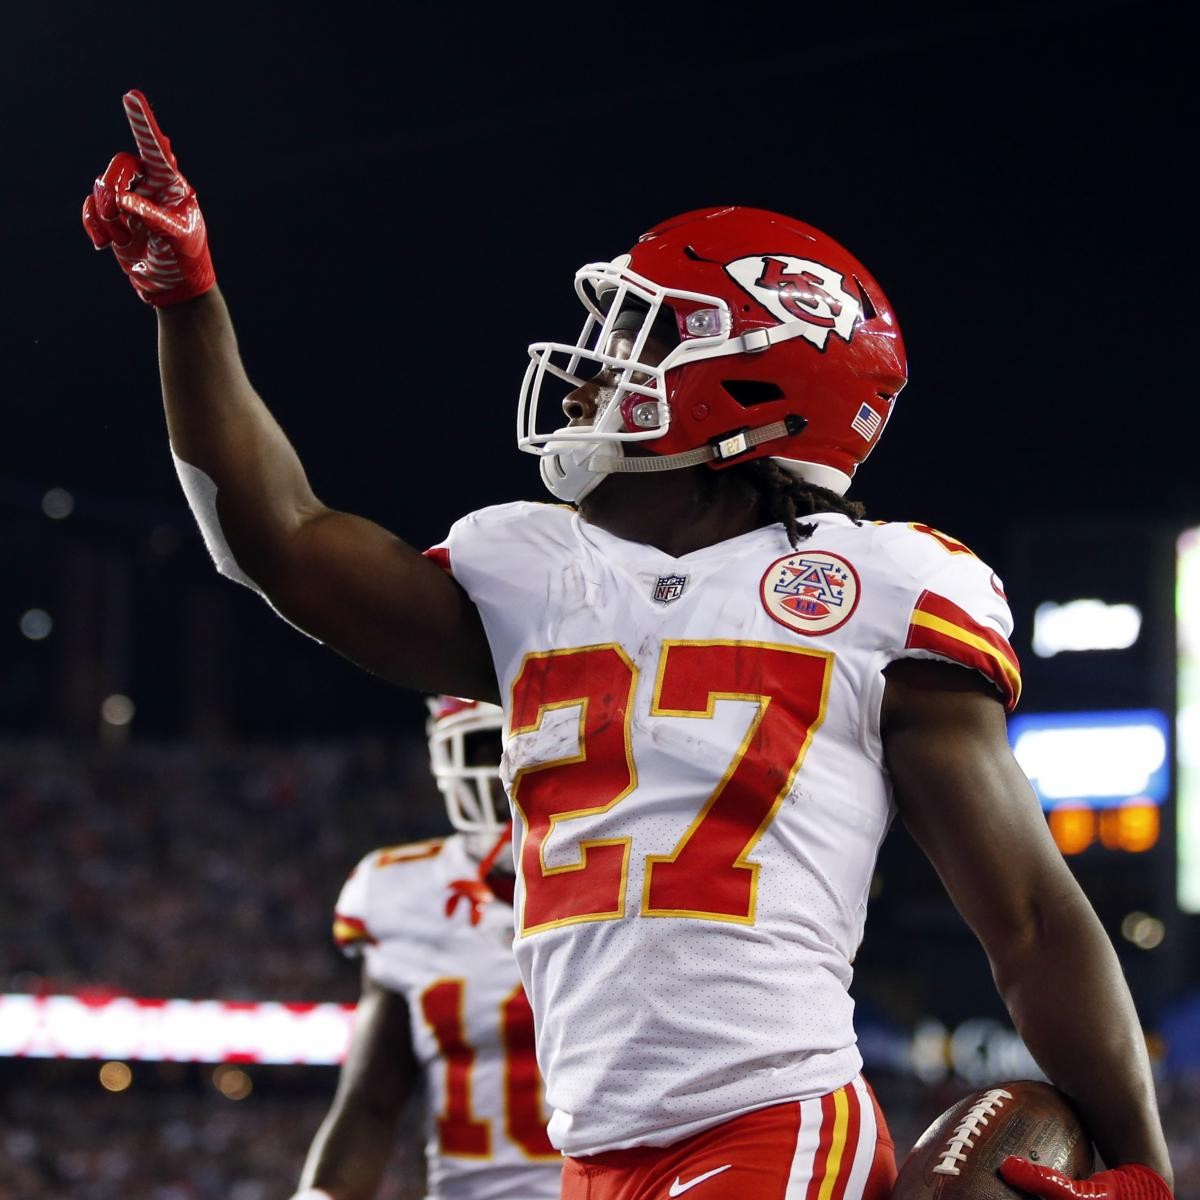 Kareem Hunt Sets NFL Record with 246 Yards from Scrimmage in Debut